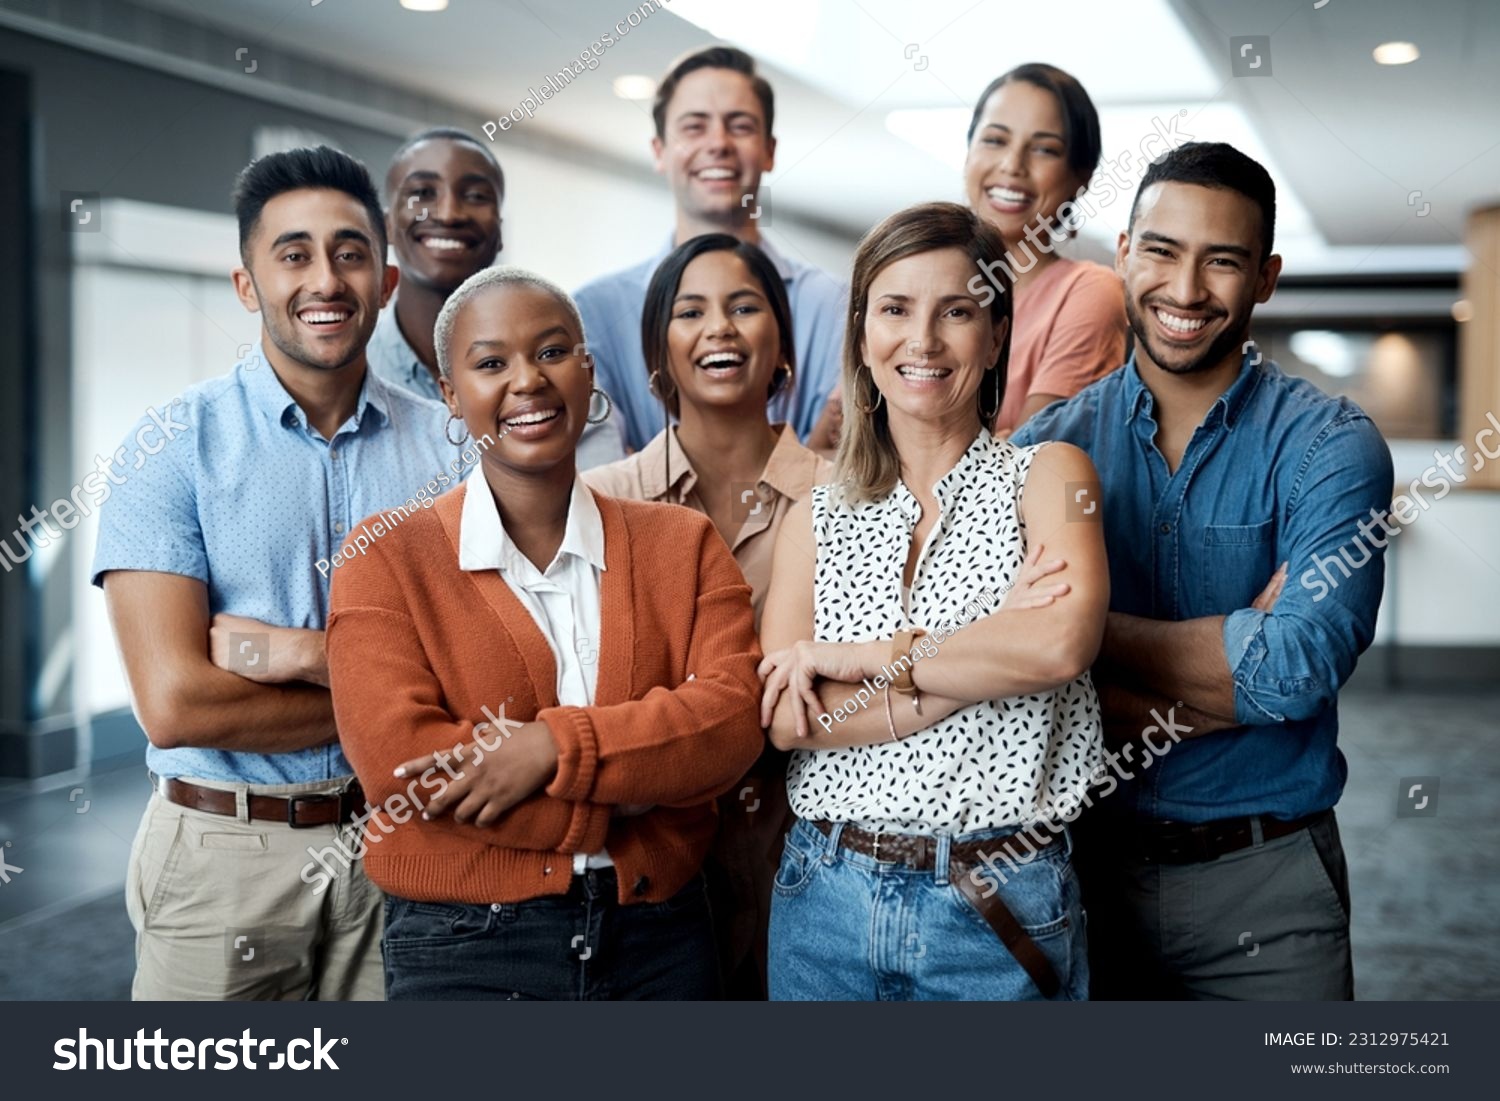 Diversity, portrait of happy colleagues and smile together in a office at their workplace. Team or collaboration, corporate workforce and excited or cheerful group of coworker faces, smiling at work #2312975421